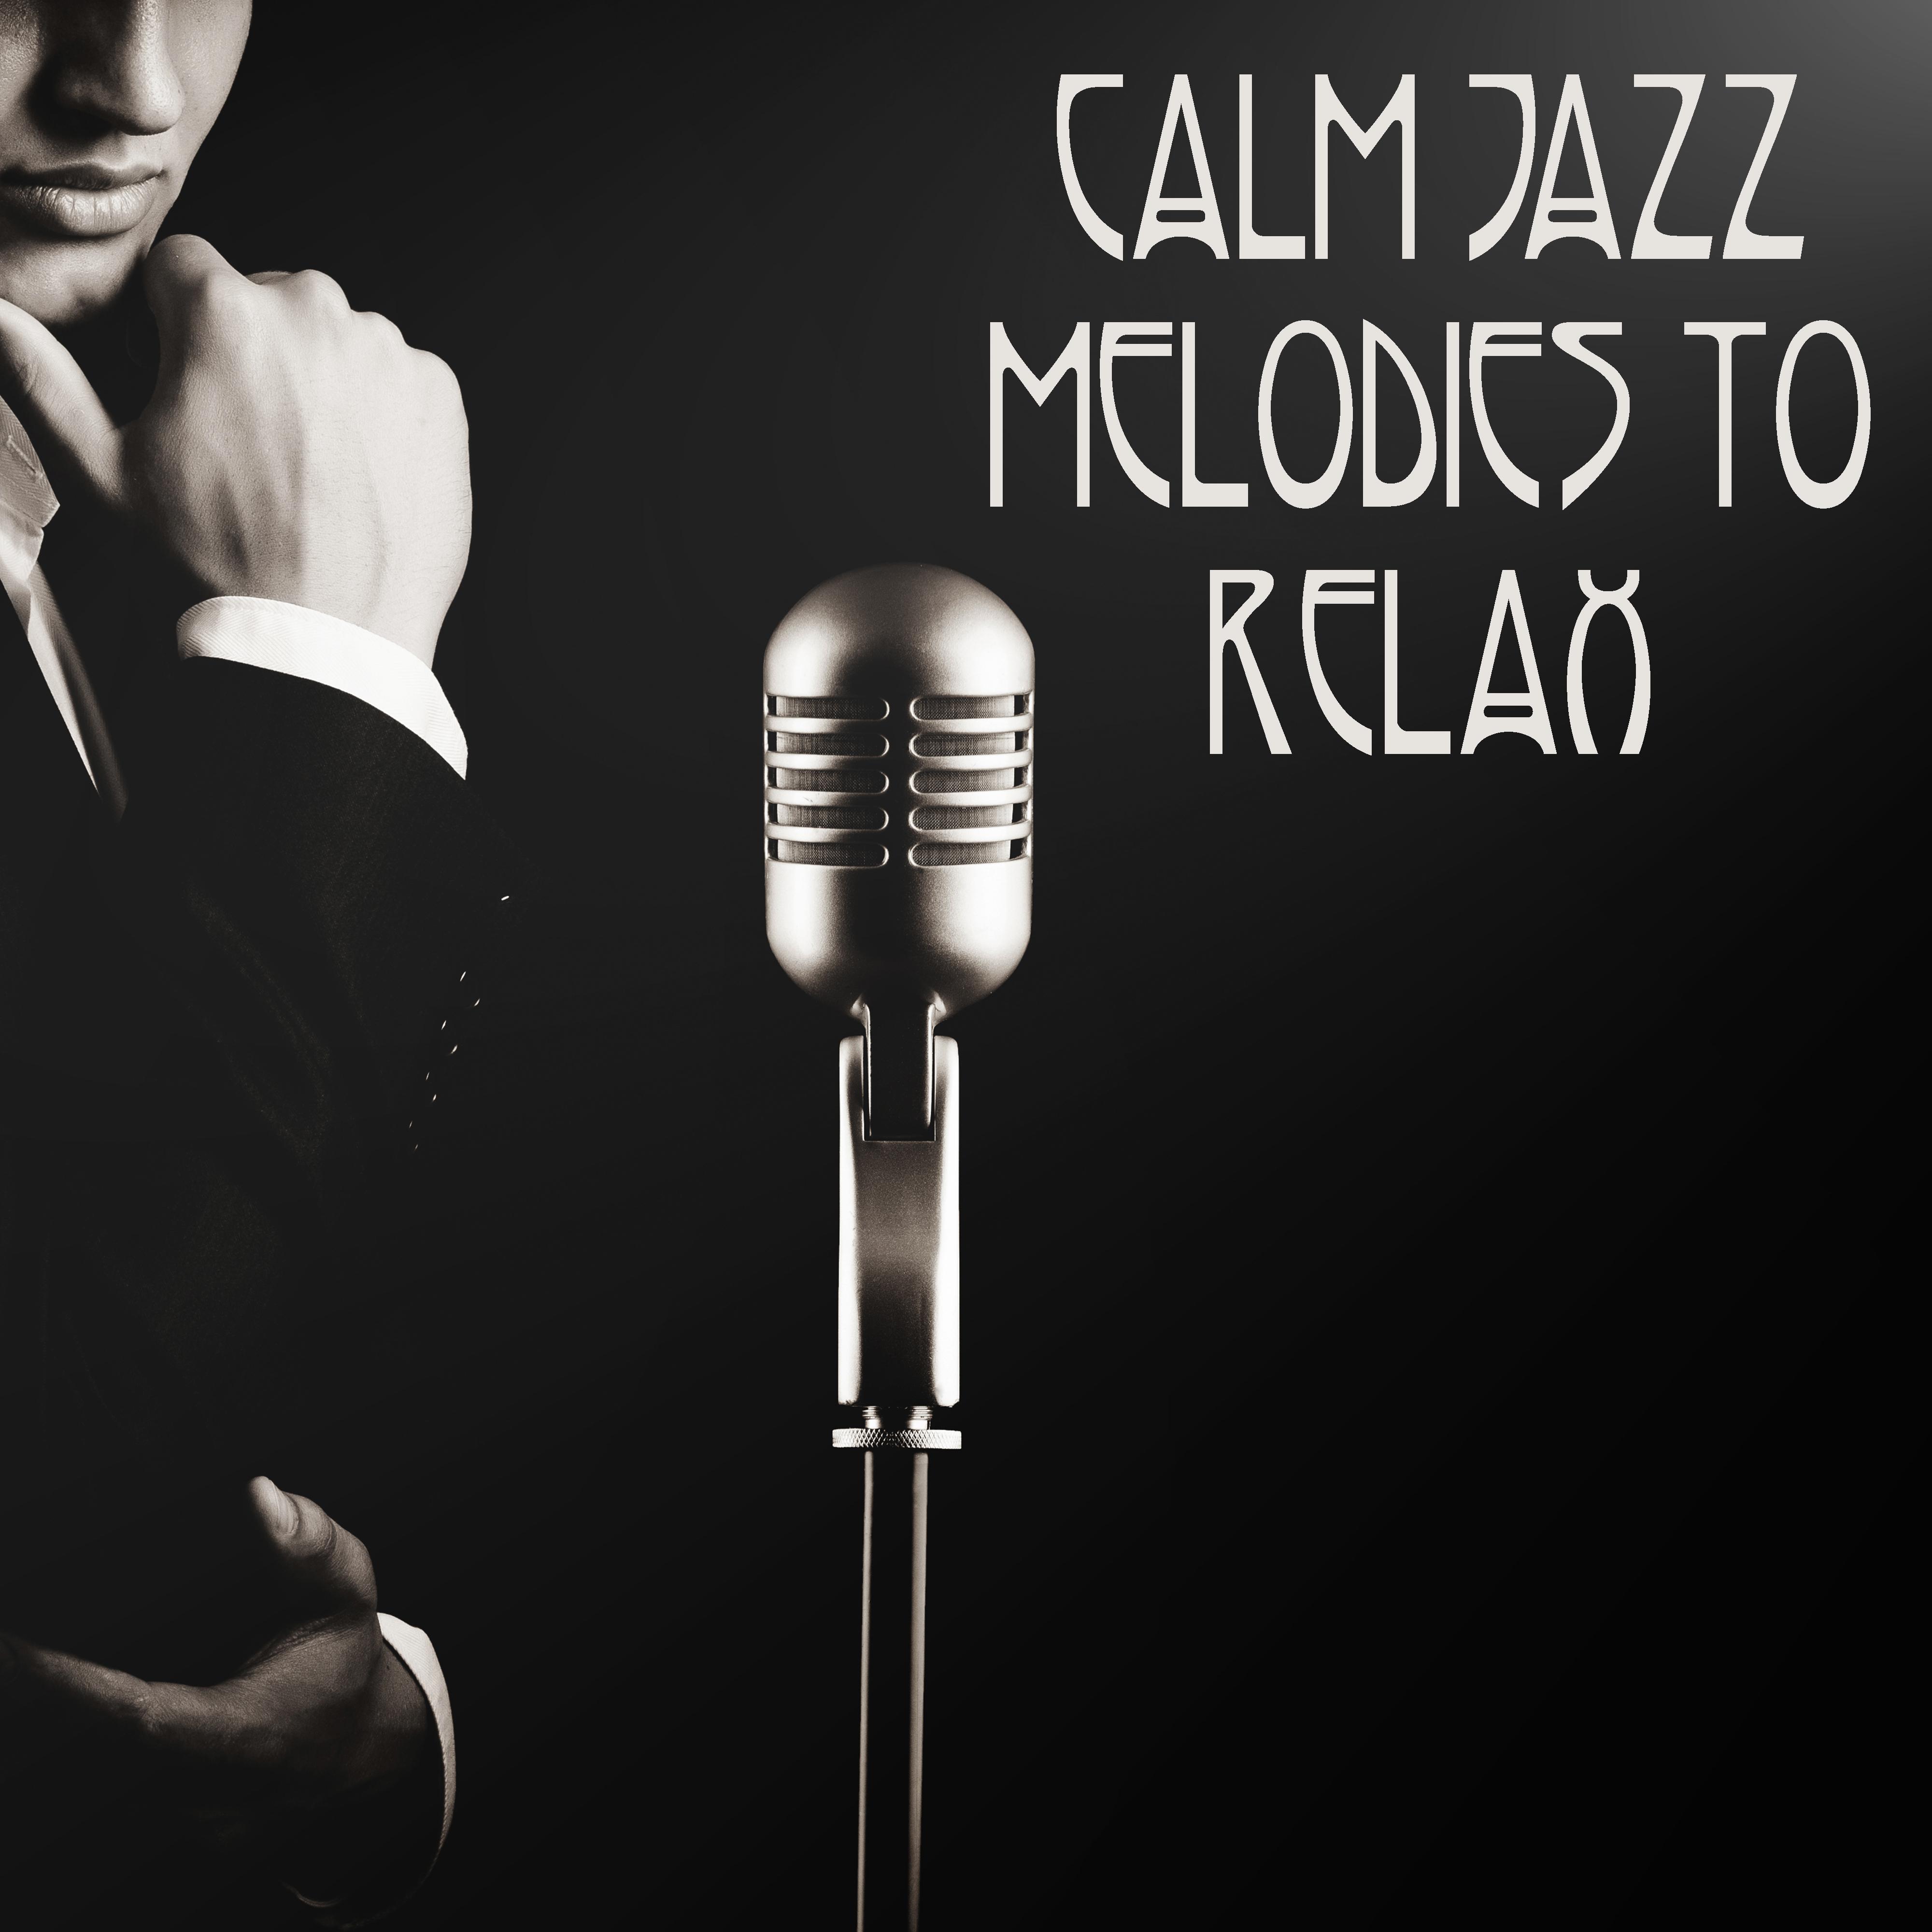 Calm Jazz Melodies to Relax